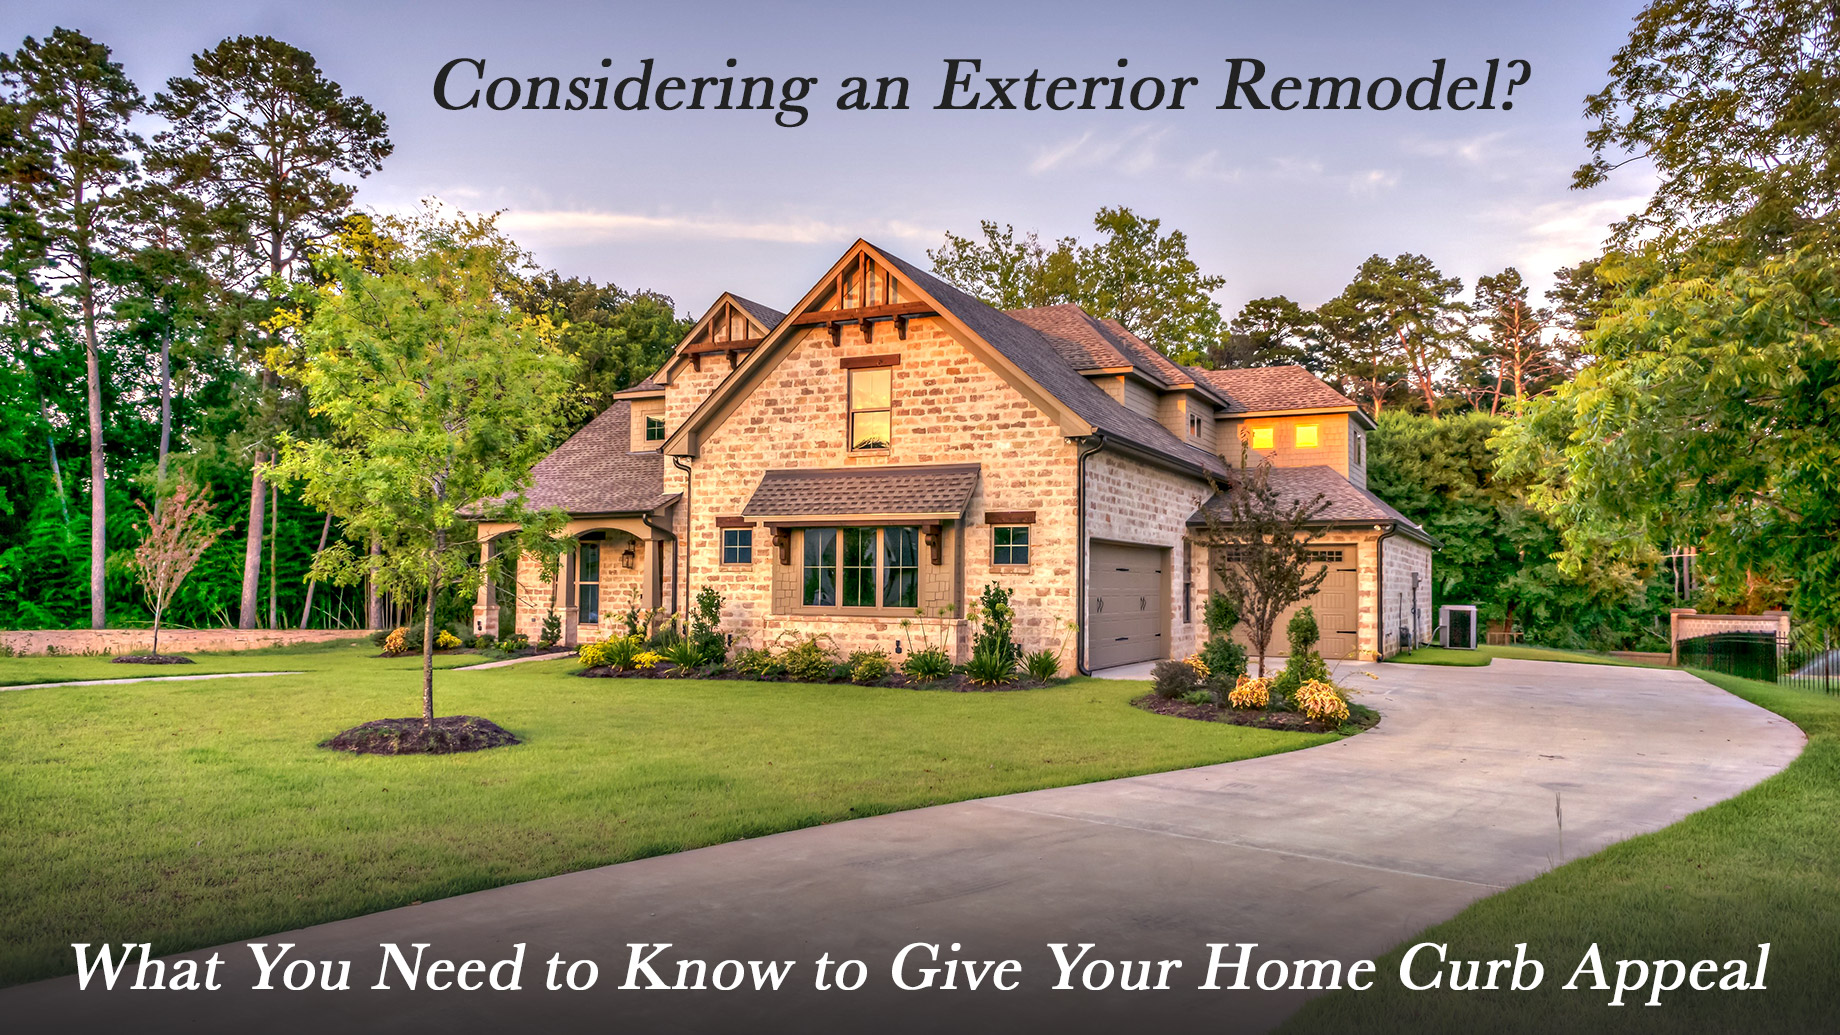 Considering an Exterior Remodel? What You Need to Know to Give Your Home Curb Appeal